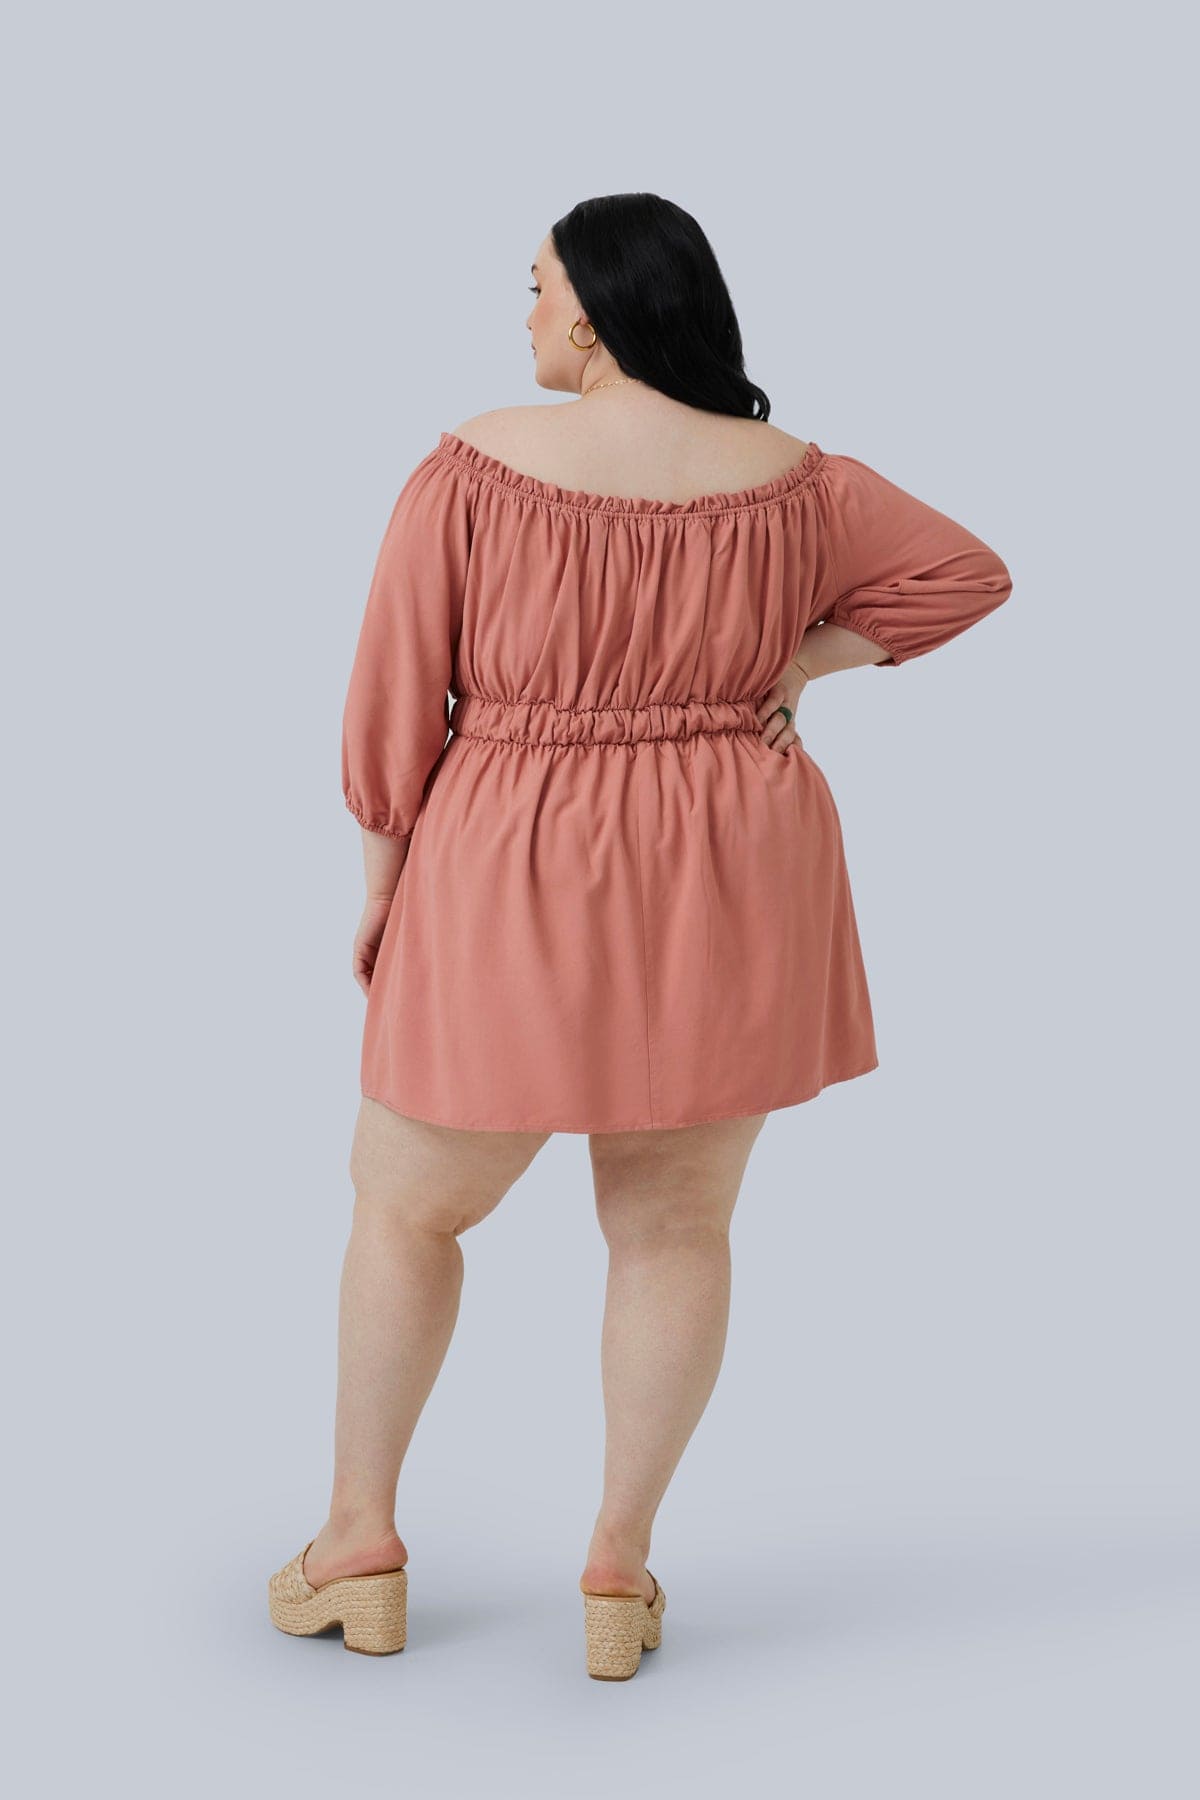 Back view of the Gianna Mini Dress in blush size 3X. Plus size model has one hand on hip and the dress is a little bit shorter than mid-thigh. Sexy, sassy and super cute plus size fashion for women. Shop Gia IRL Plus Size Boutique.